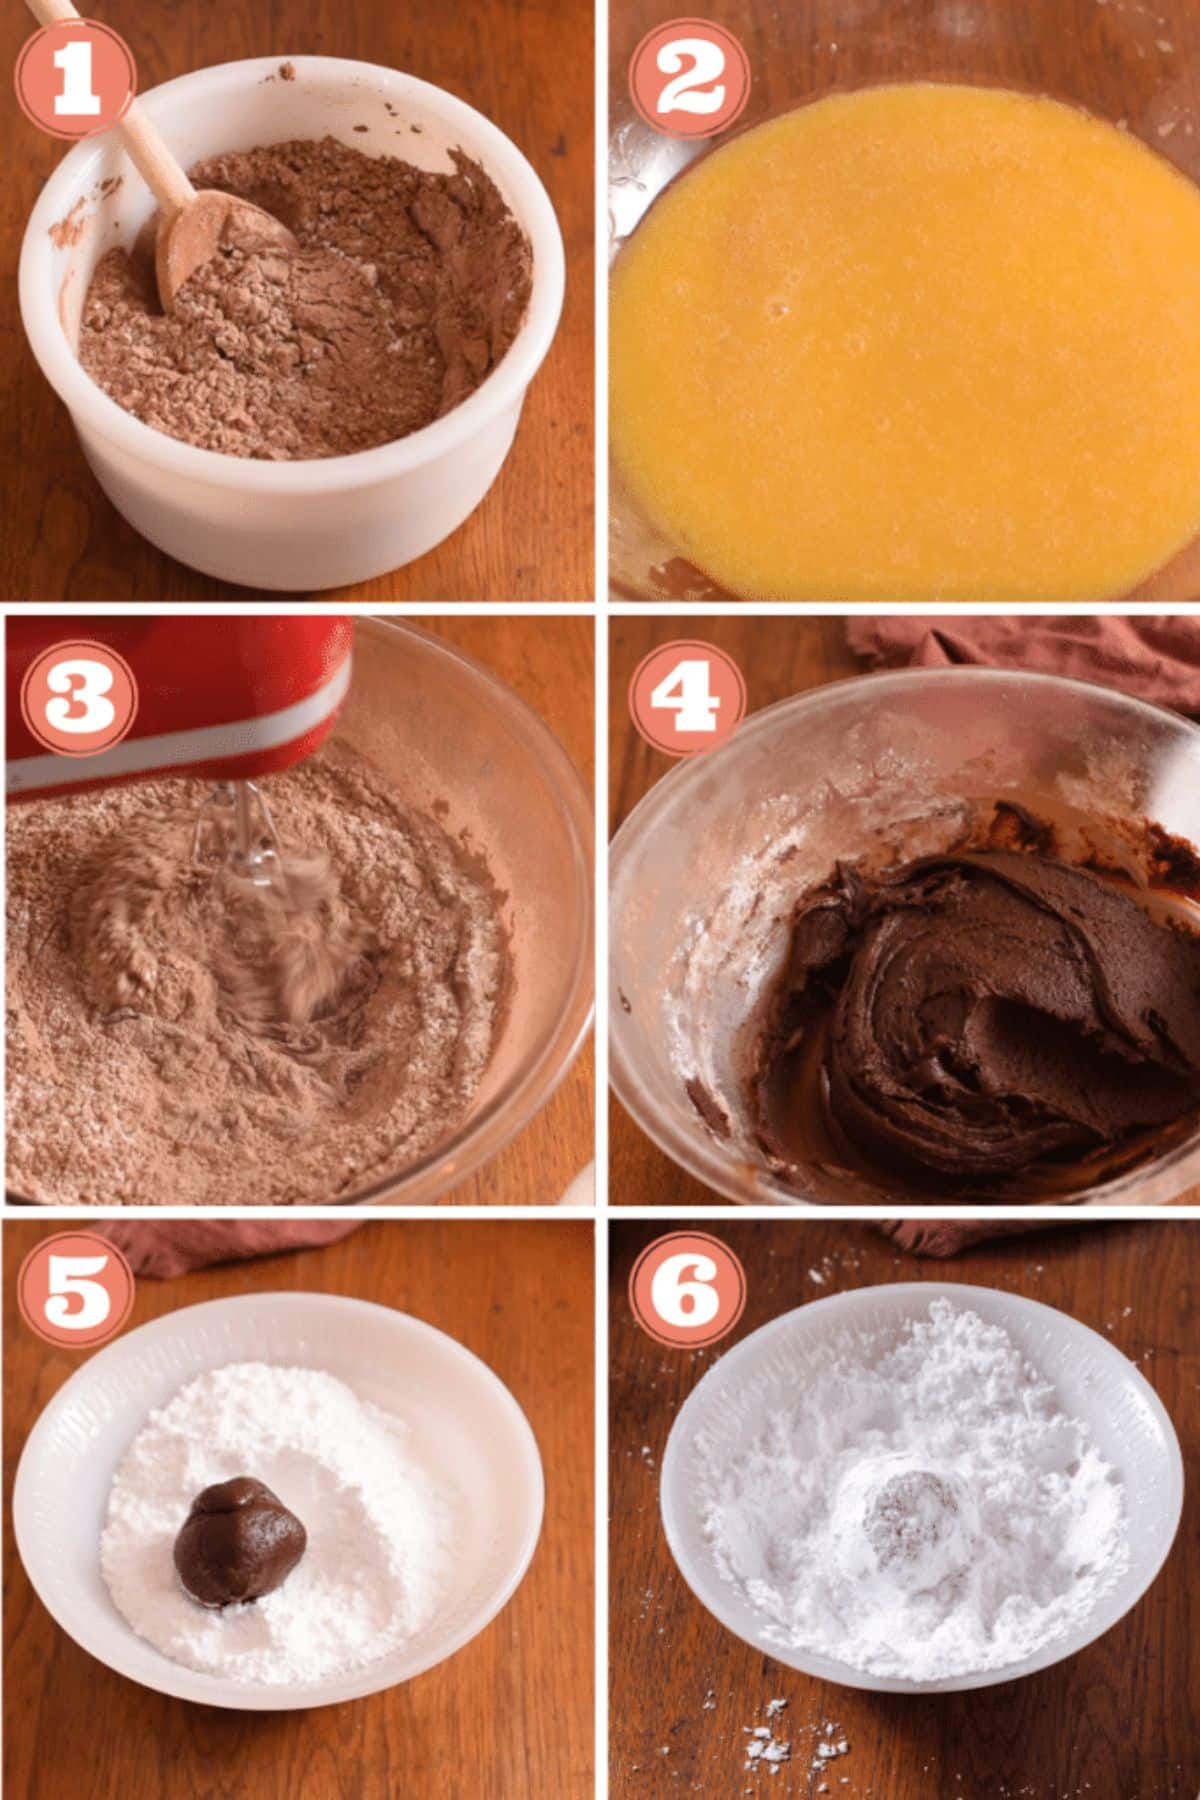 Graphic showing process to make chocolate crinkles in 6 steps.